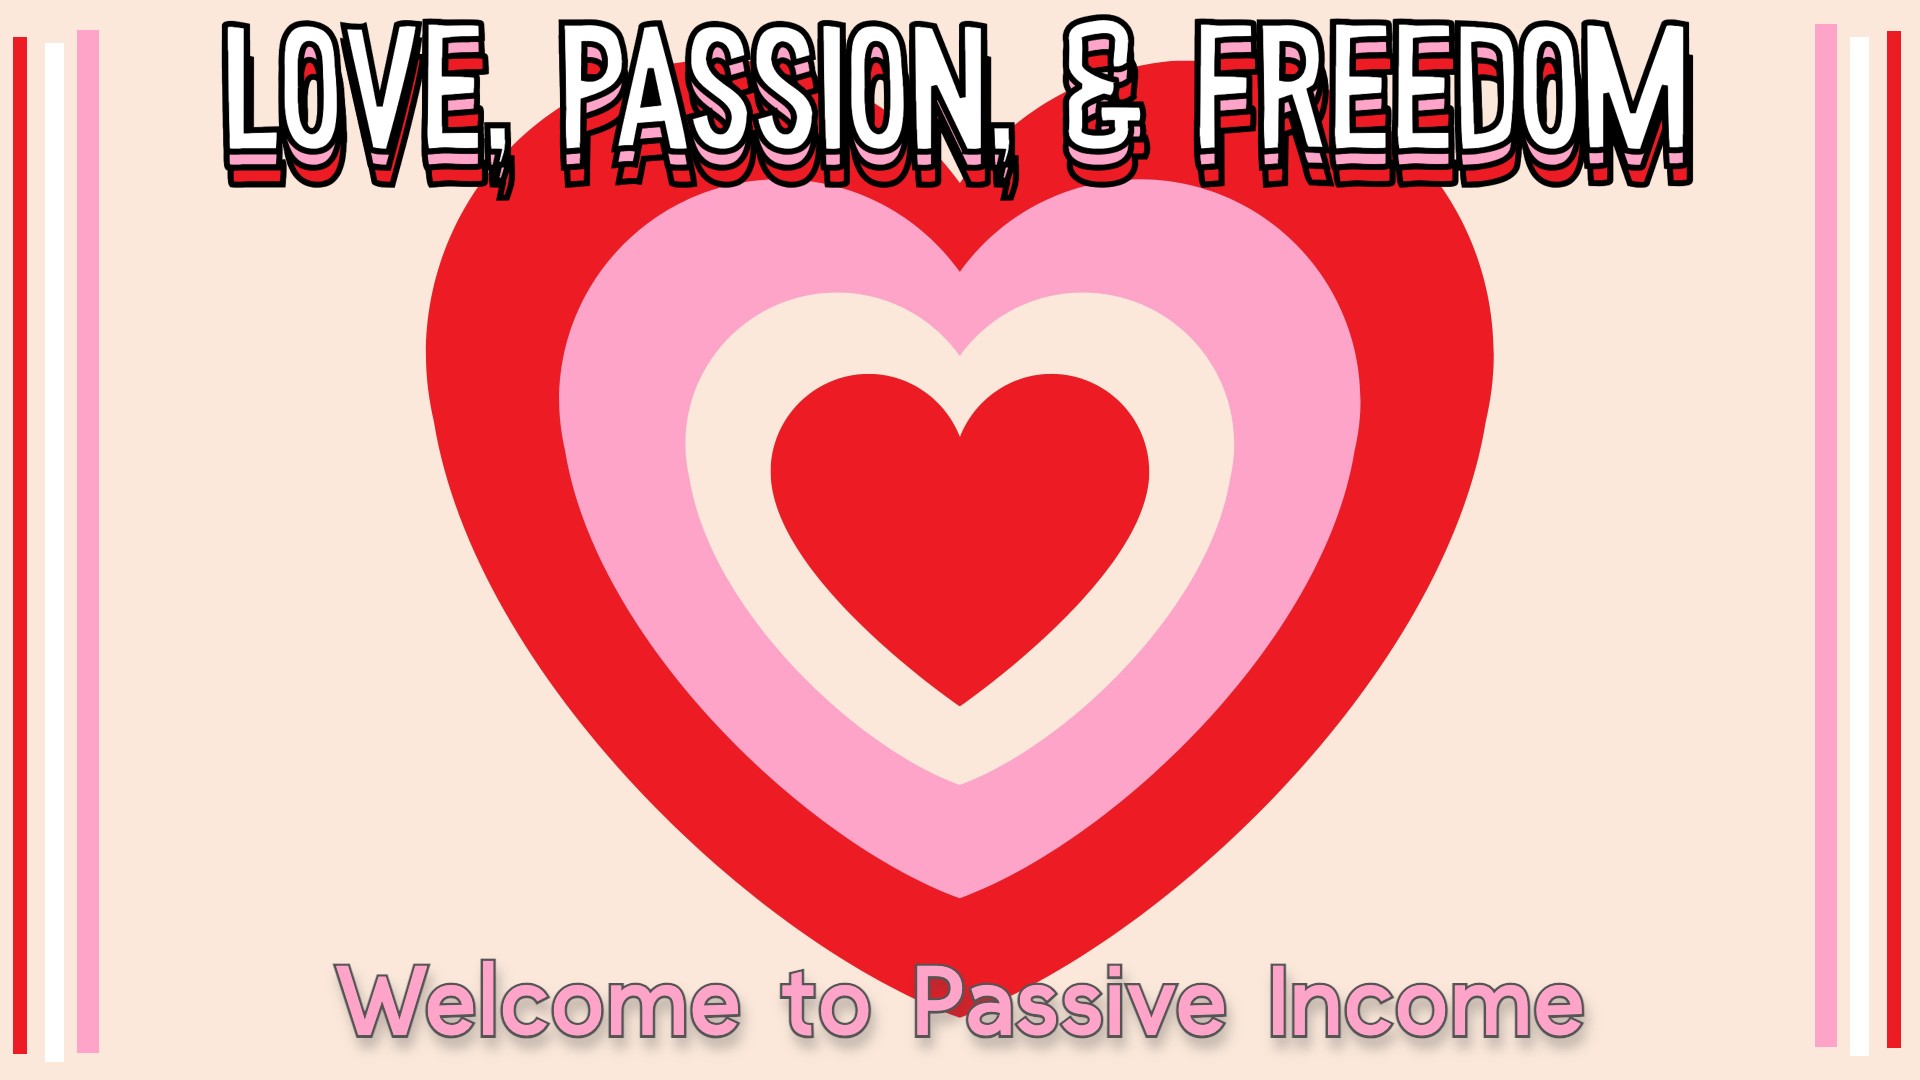 Love, Passion, & Freedom: Welcome to Passive Income